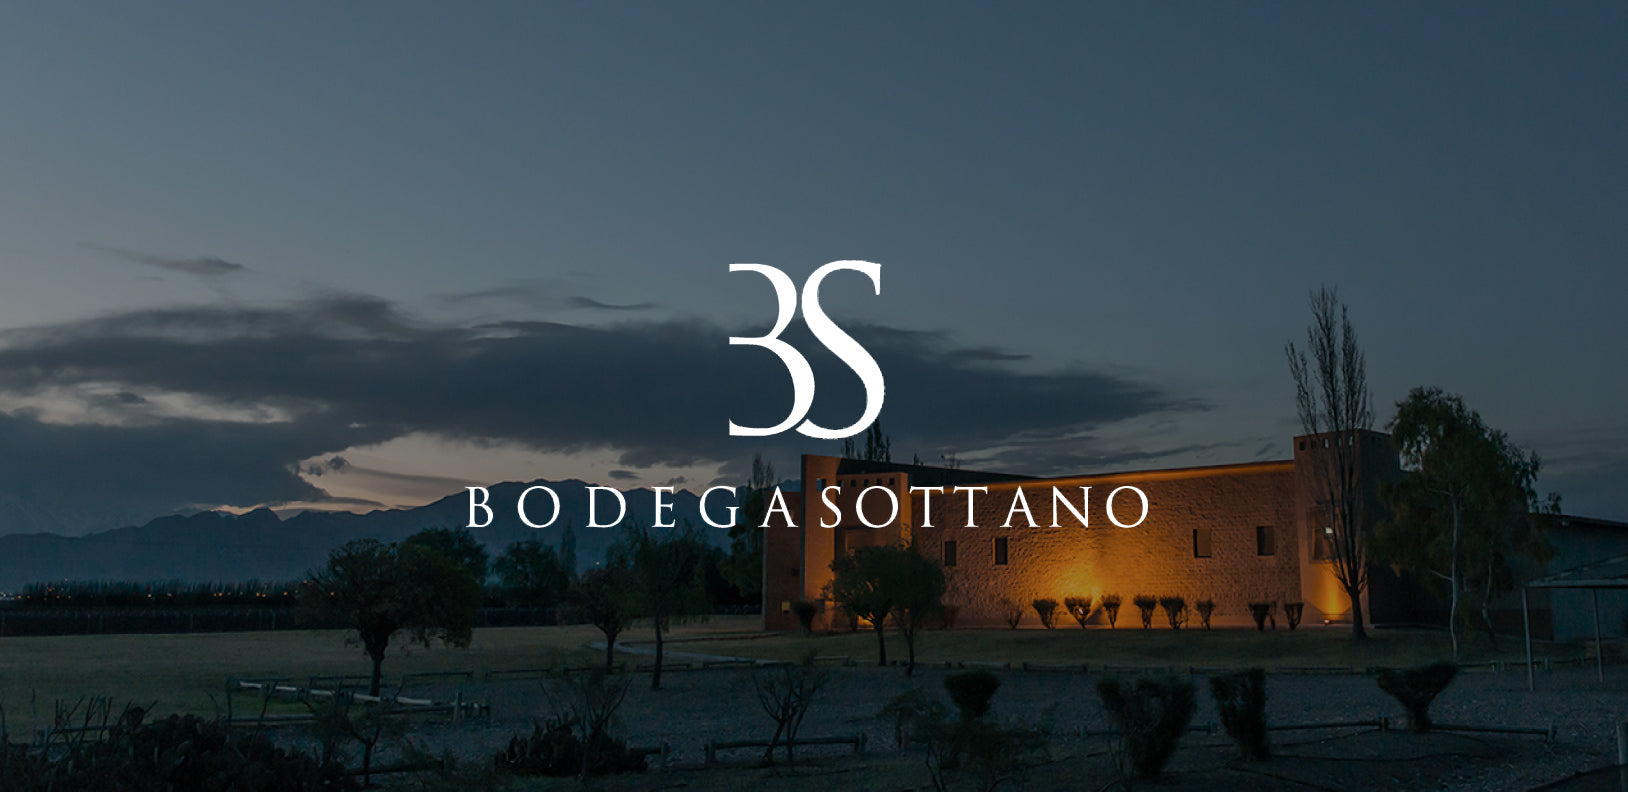 sottano winery with logo